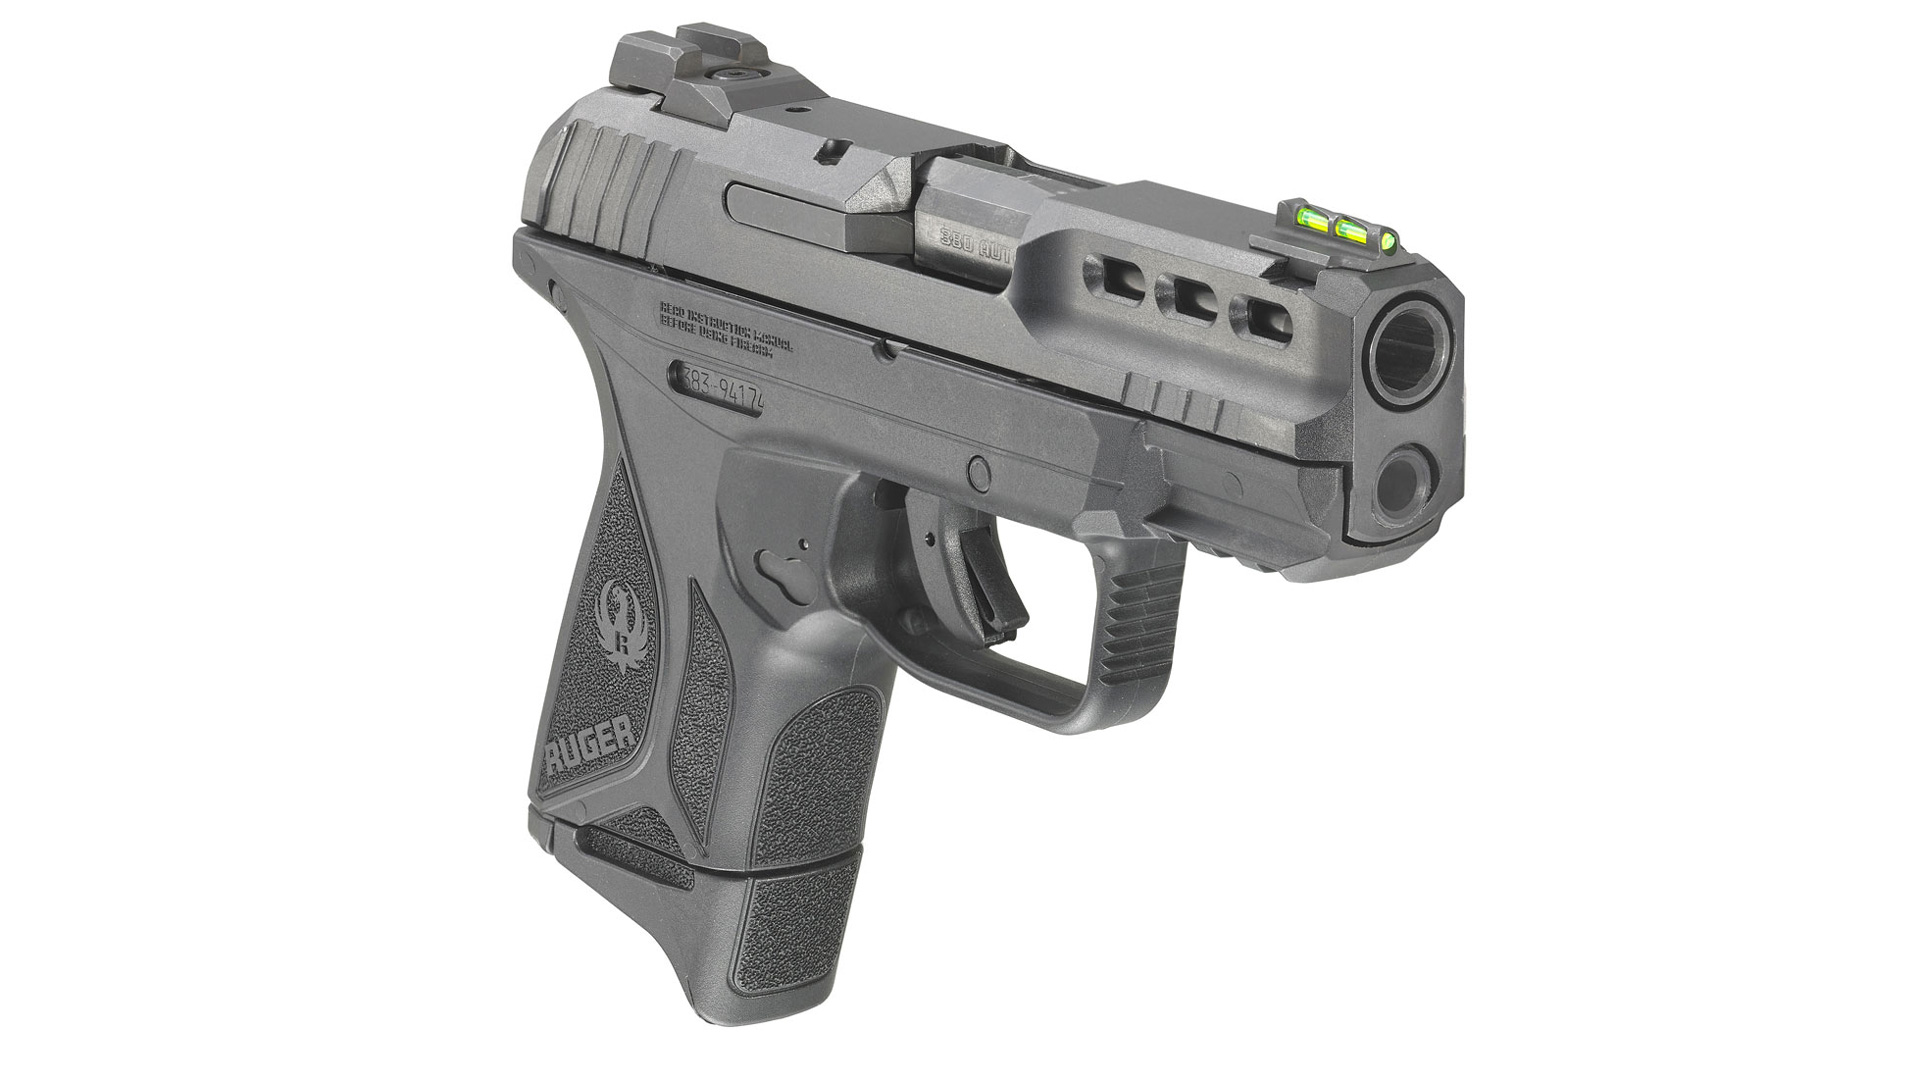 Ruger LCP Standard .380 ACP Pistol